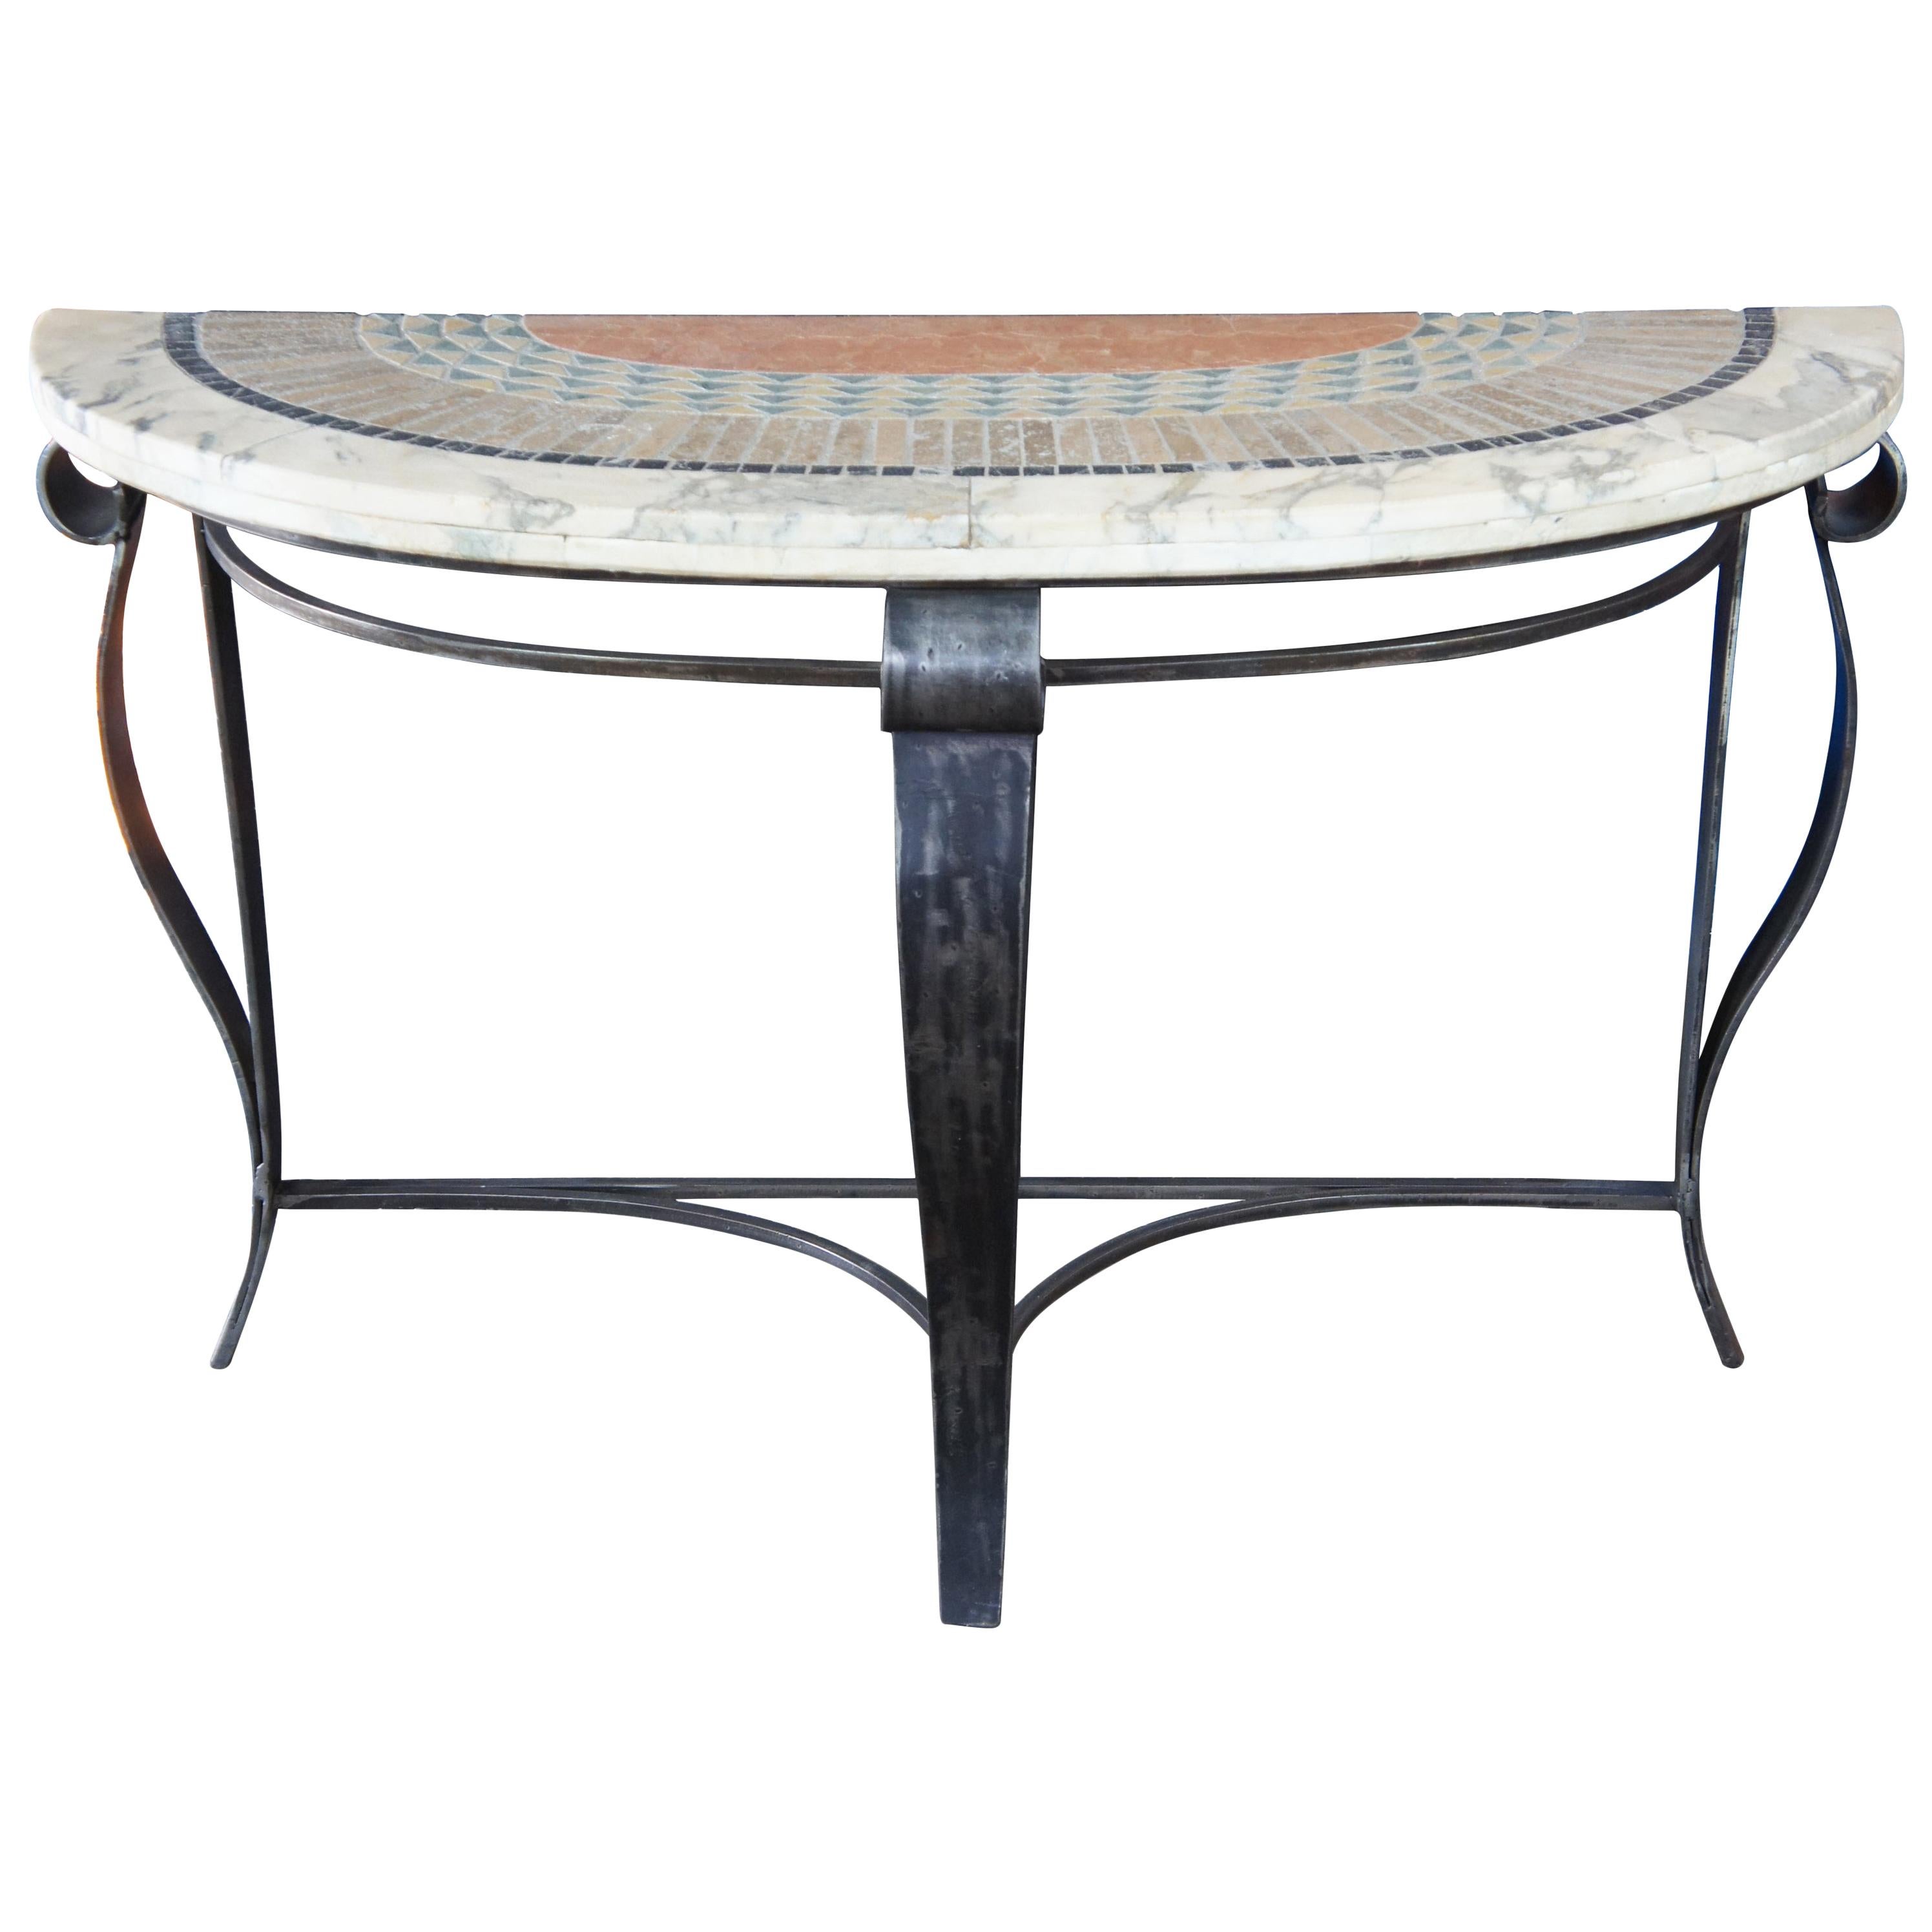 Southwestern Mosaic Tiled Stone Scrolled Iron Base Demilune Console Entry Table For Sale